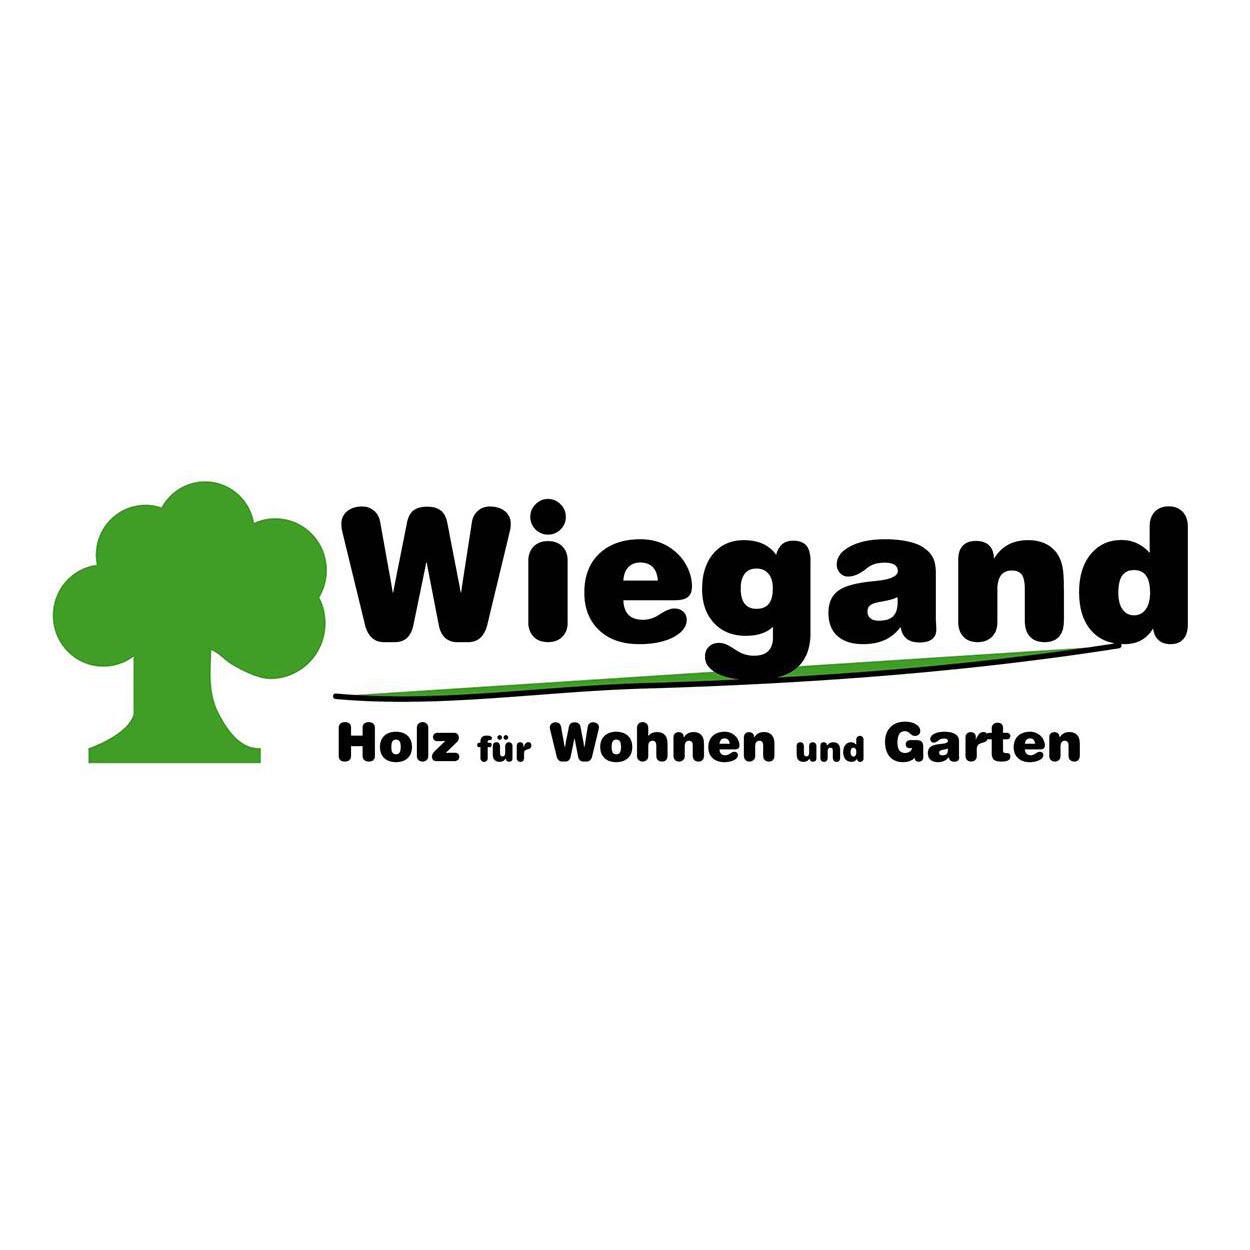 Holz Wiegand  